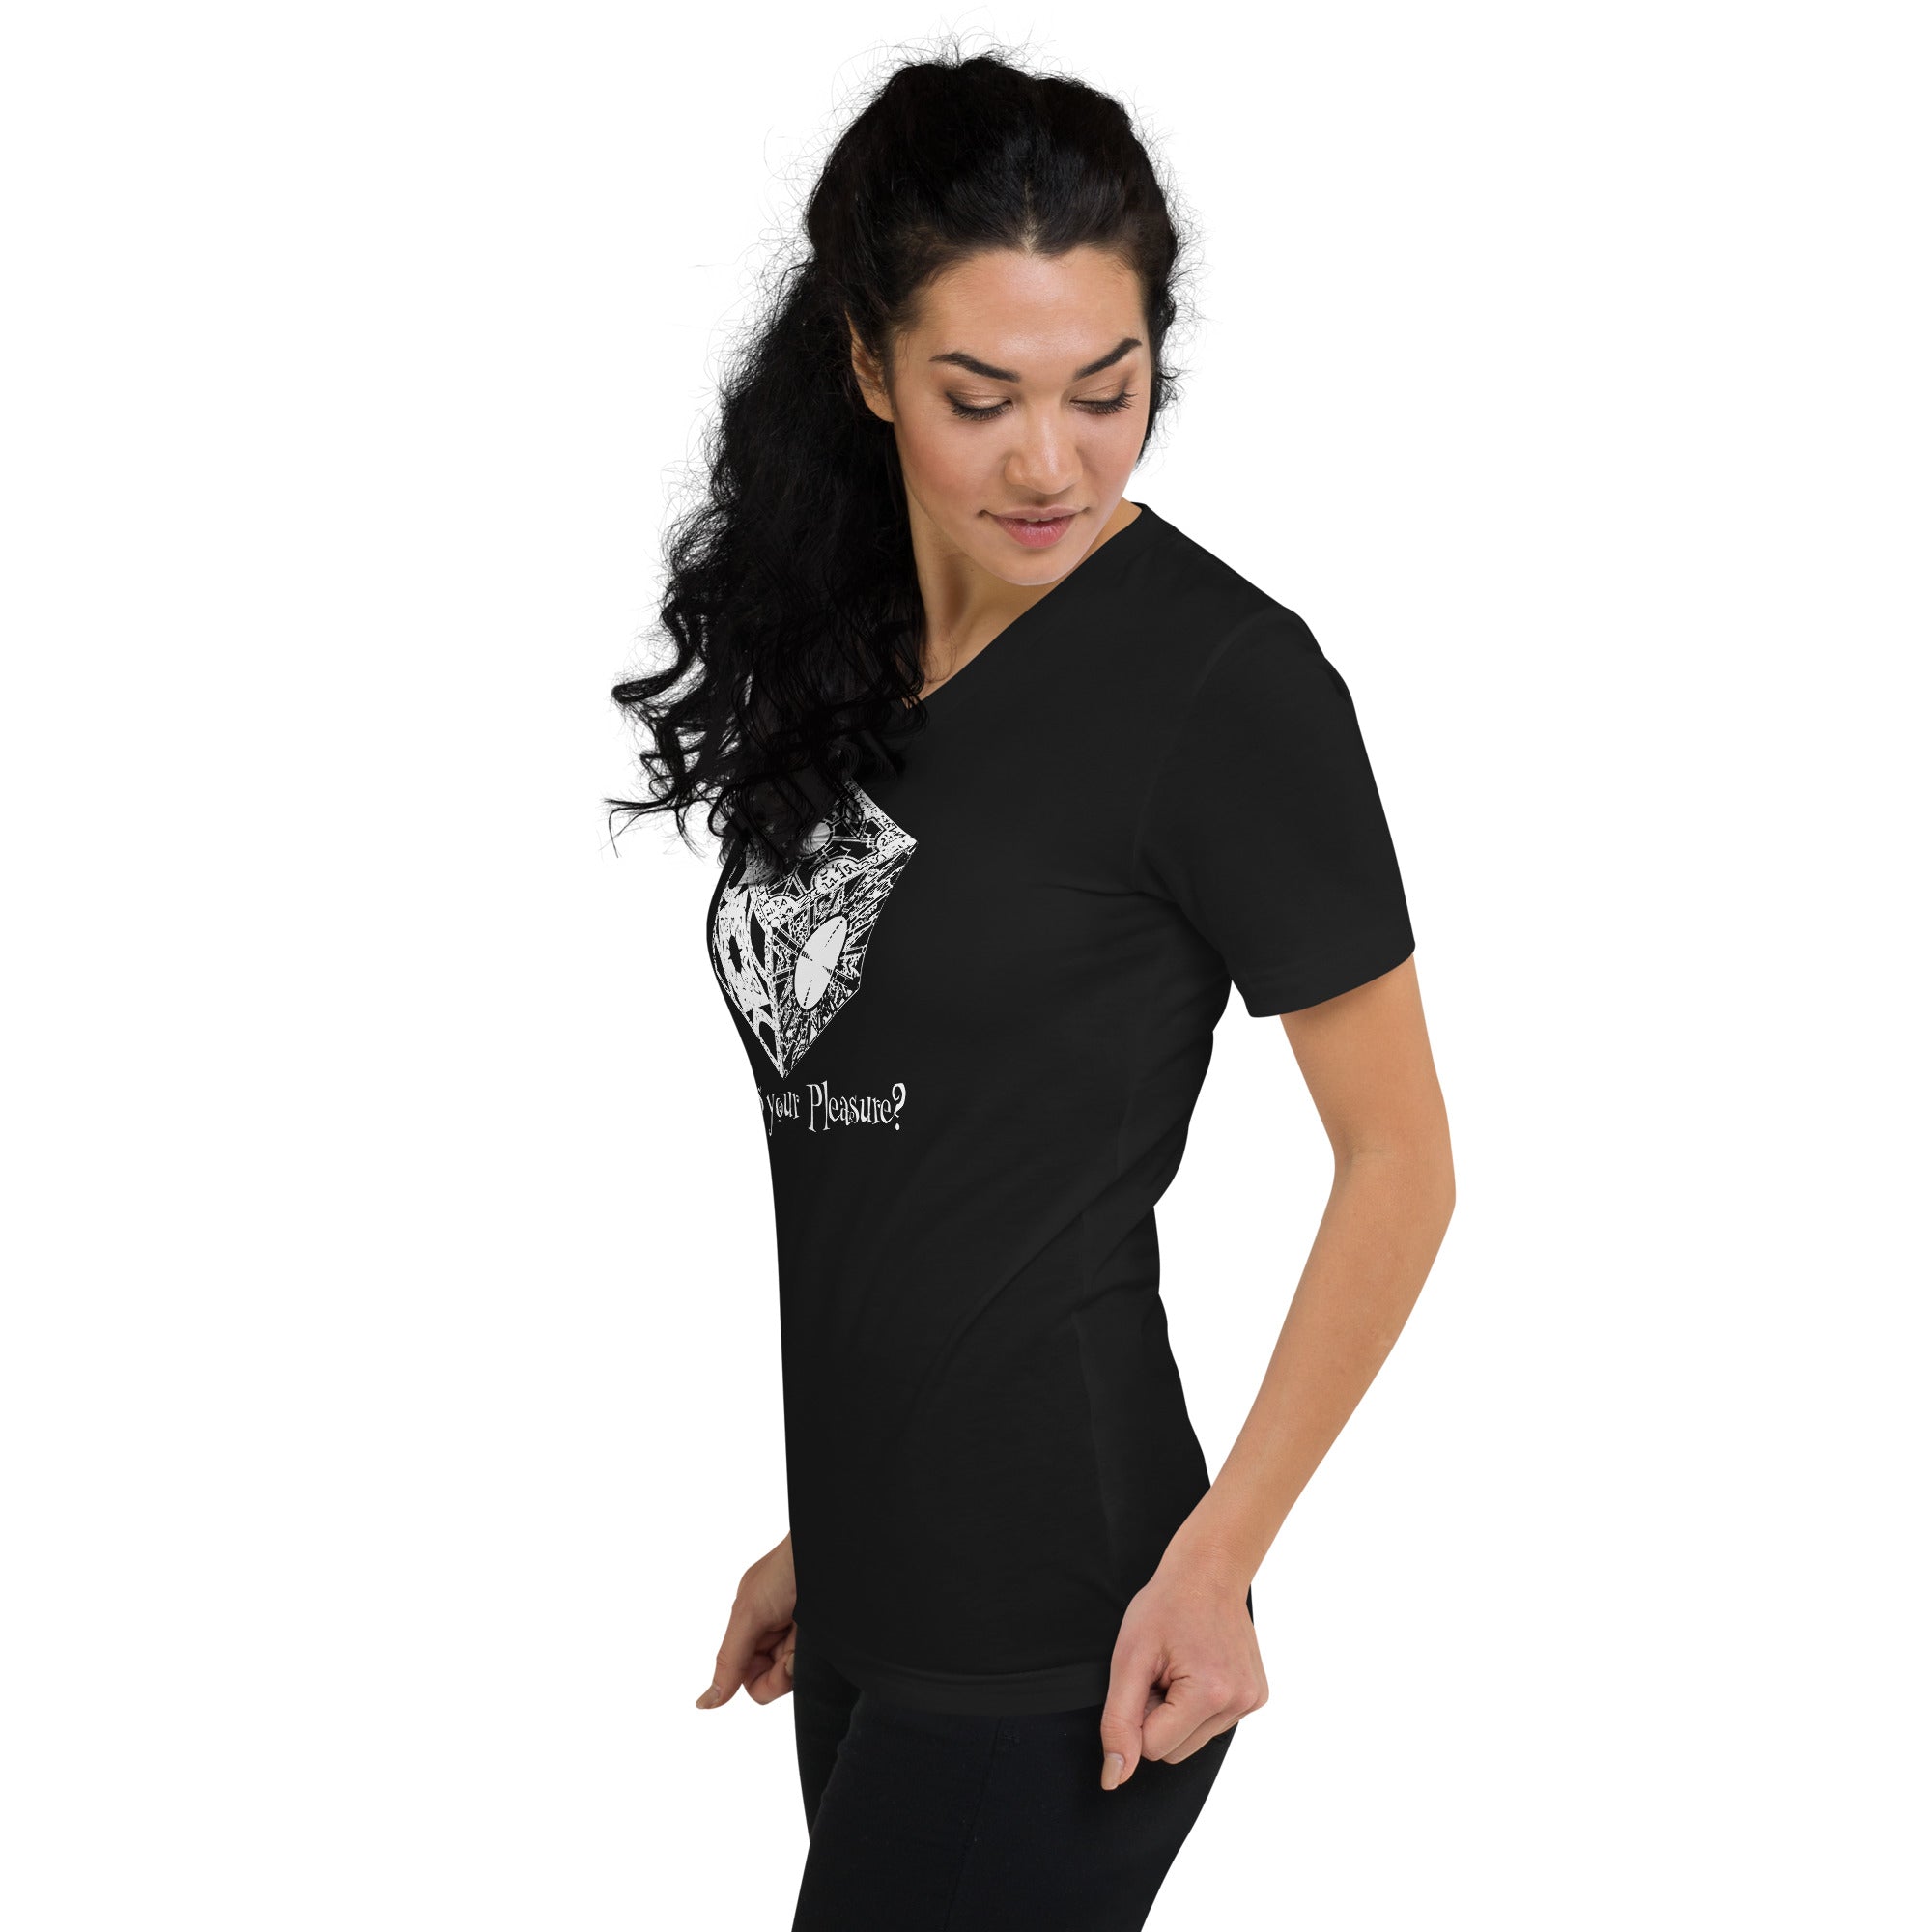 Puzzle Box - What is your Pleasure? Women’s Short Sleeve V-Neck T-Shirt - Edge of Life Designs